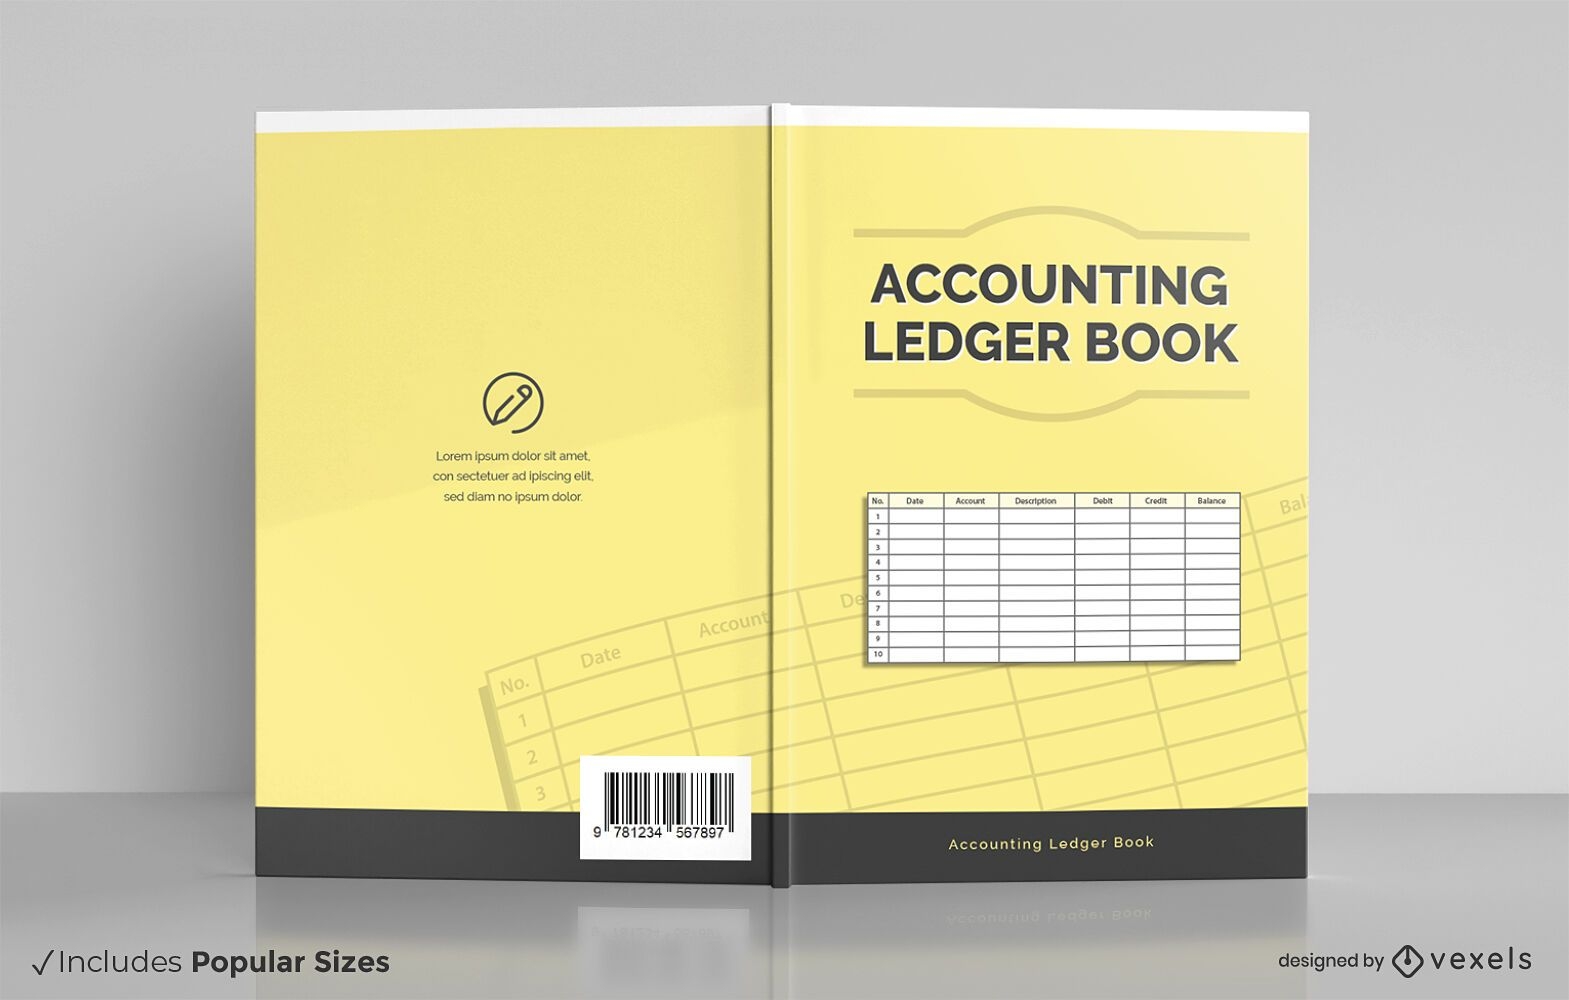 Accounting ledger book cover design